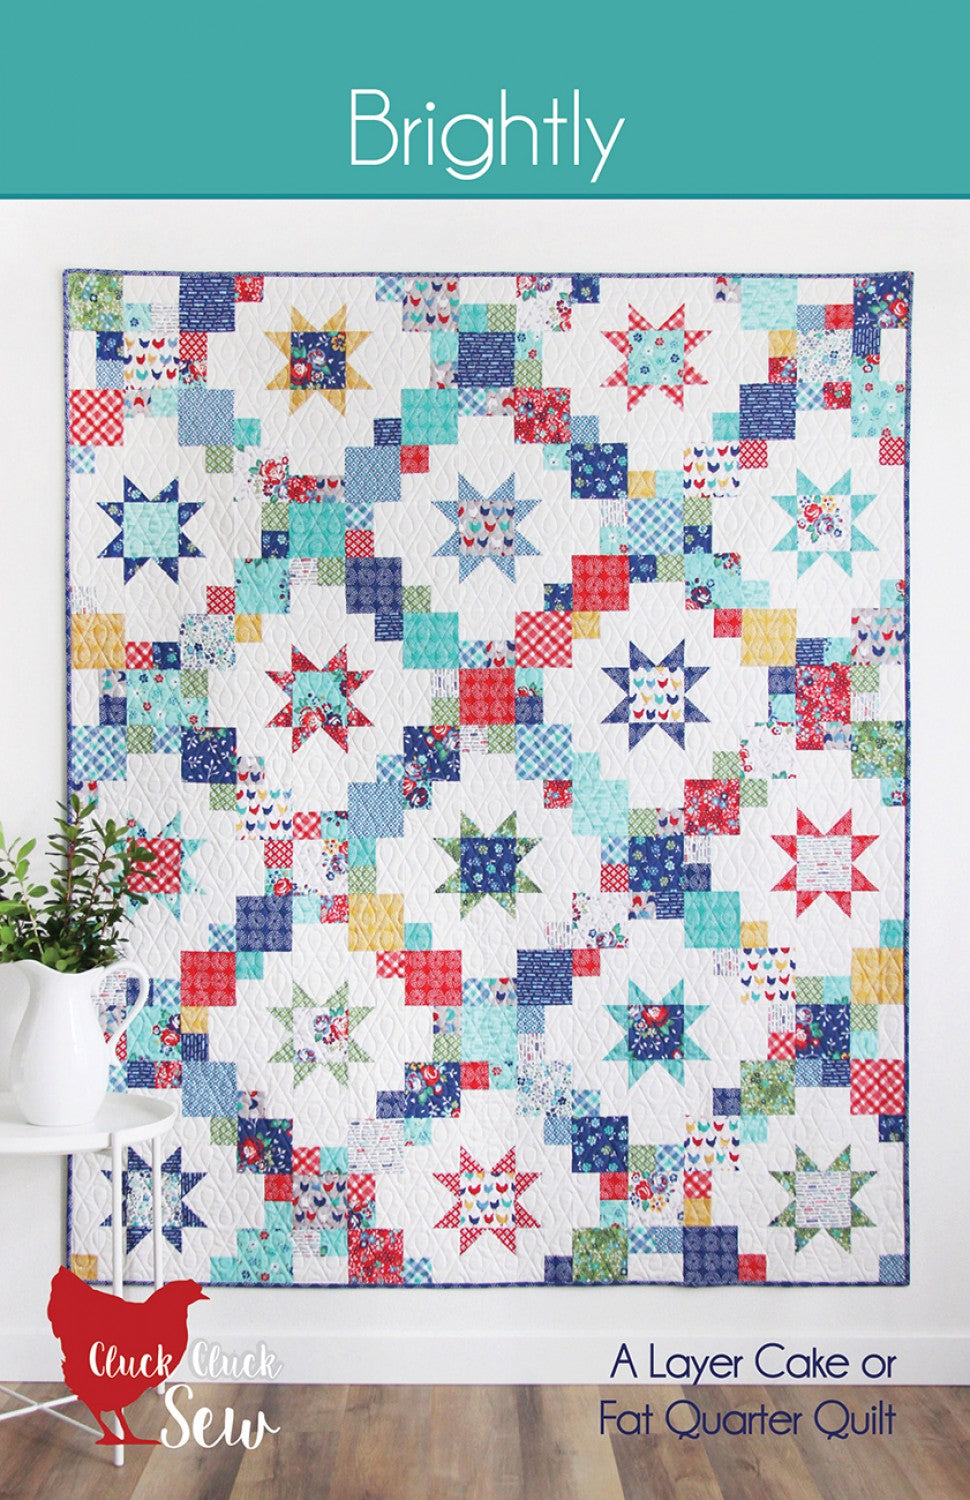 Brightly - Quilt Pattern - Cluck Cluck Sew